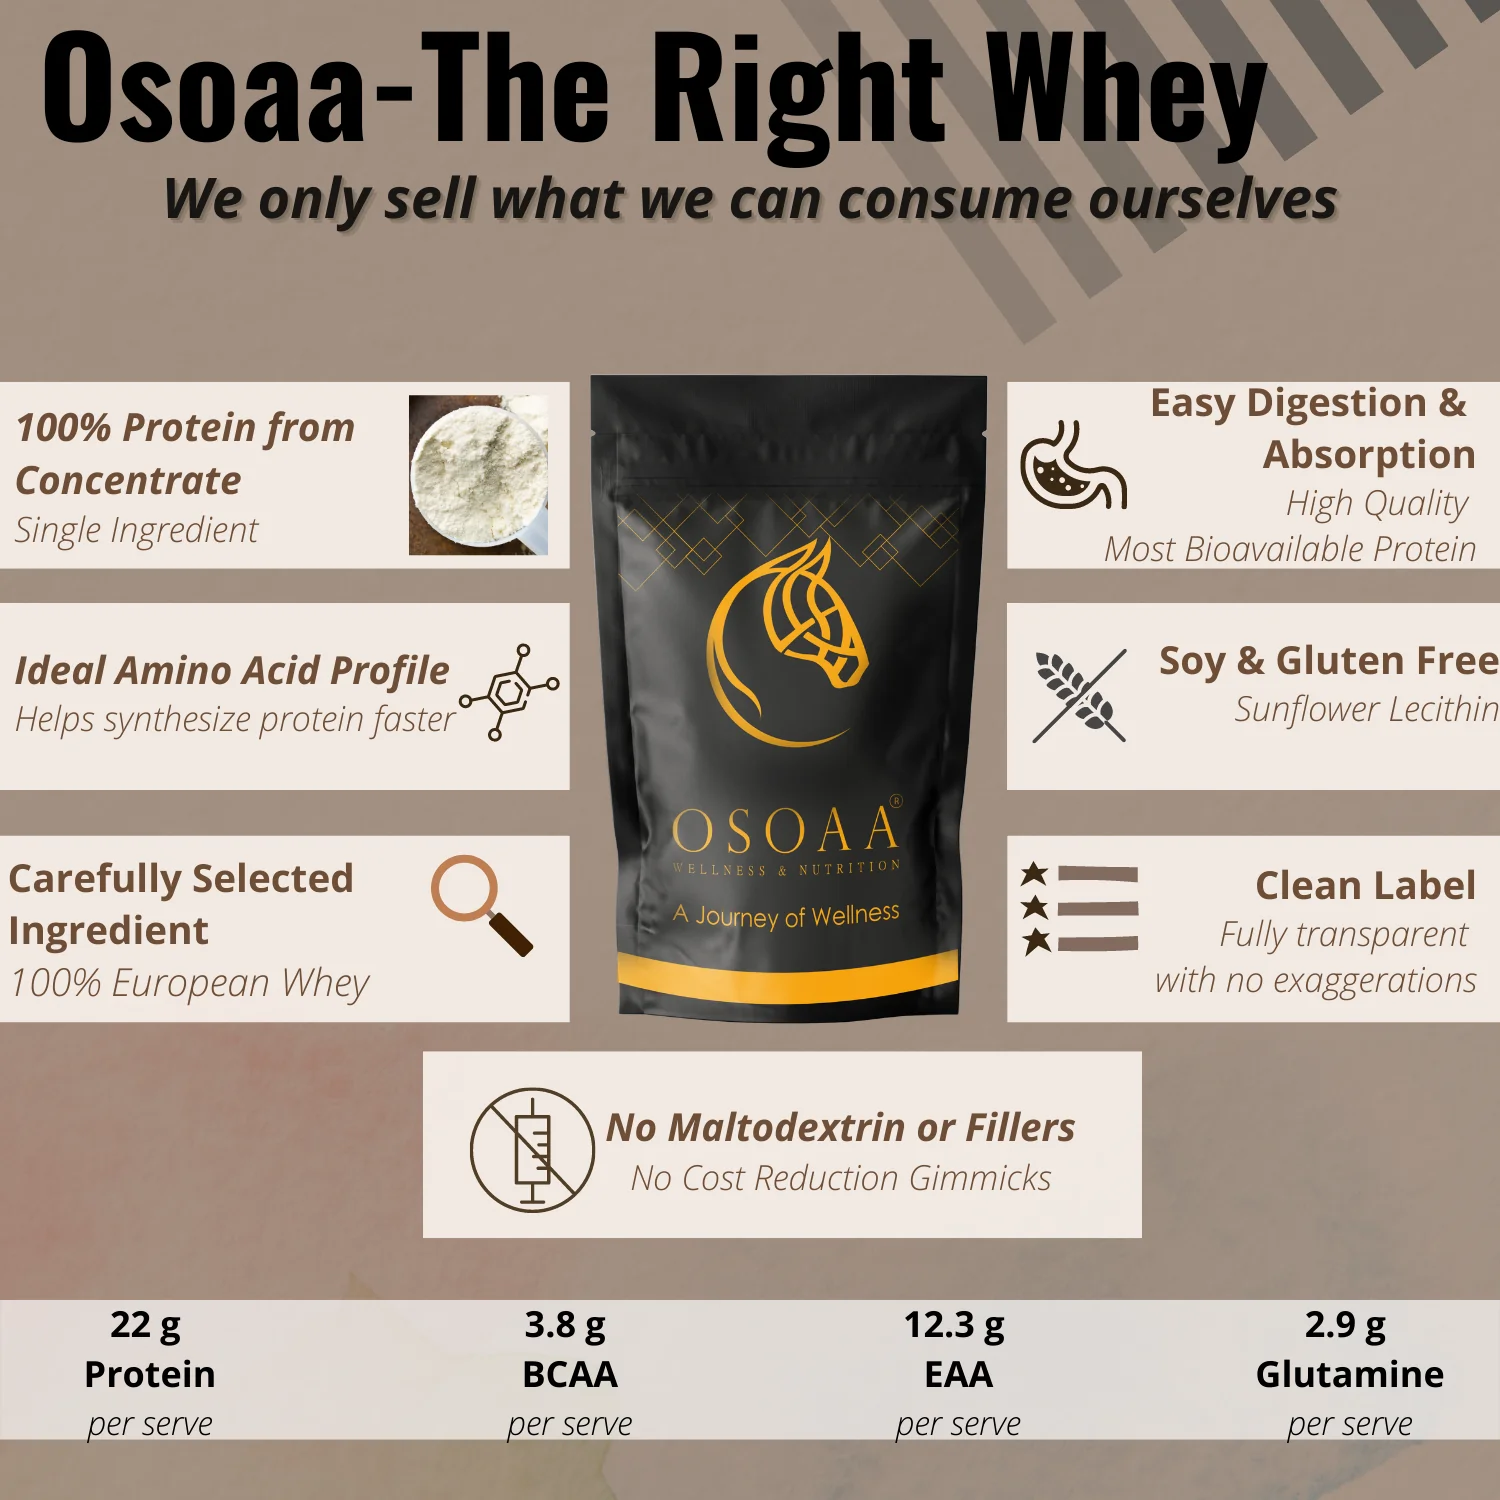 OSOAA Everyday Raw Whey Concentrate 1Kg ...